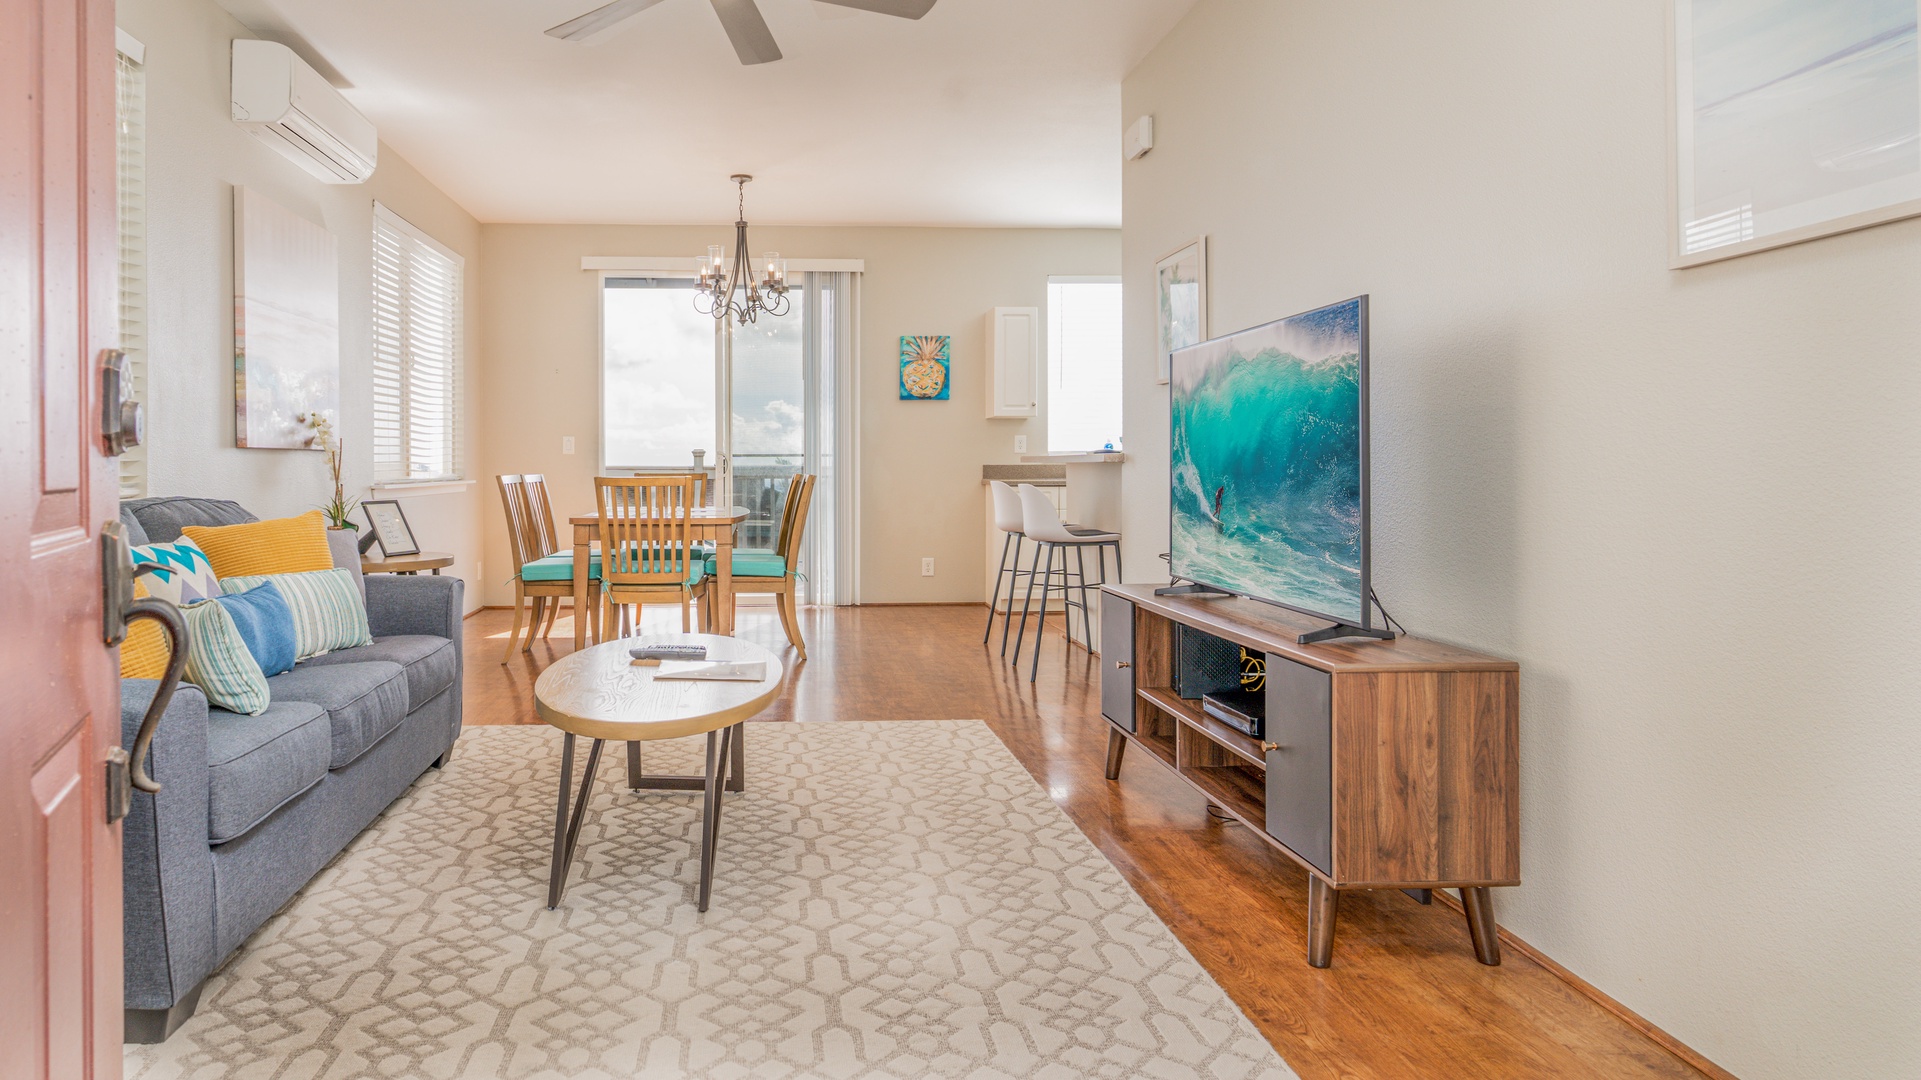 Kapolei Vacation Rentals, Makakilo Elele 48 - Seamless flow from the living, dining, kitchen and lanai areas as you enter the home.